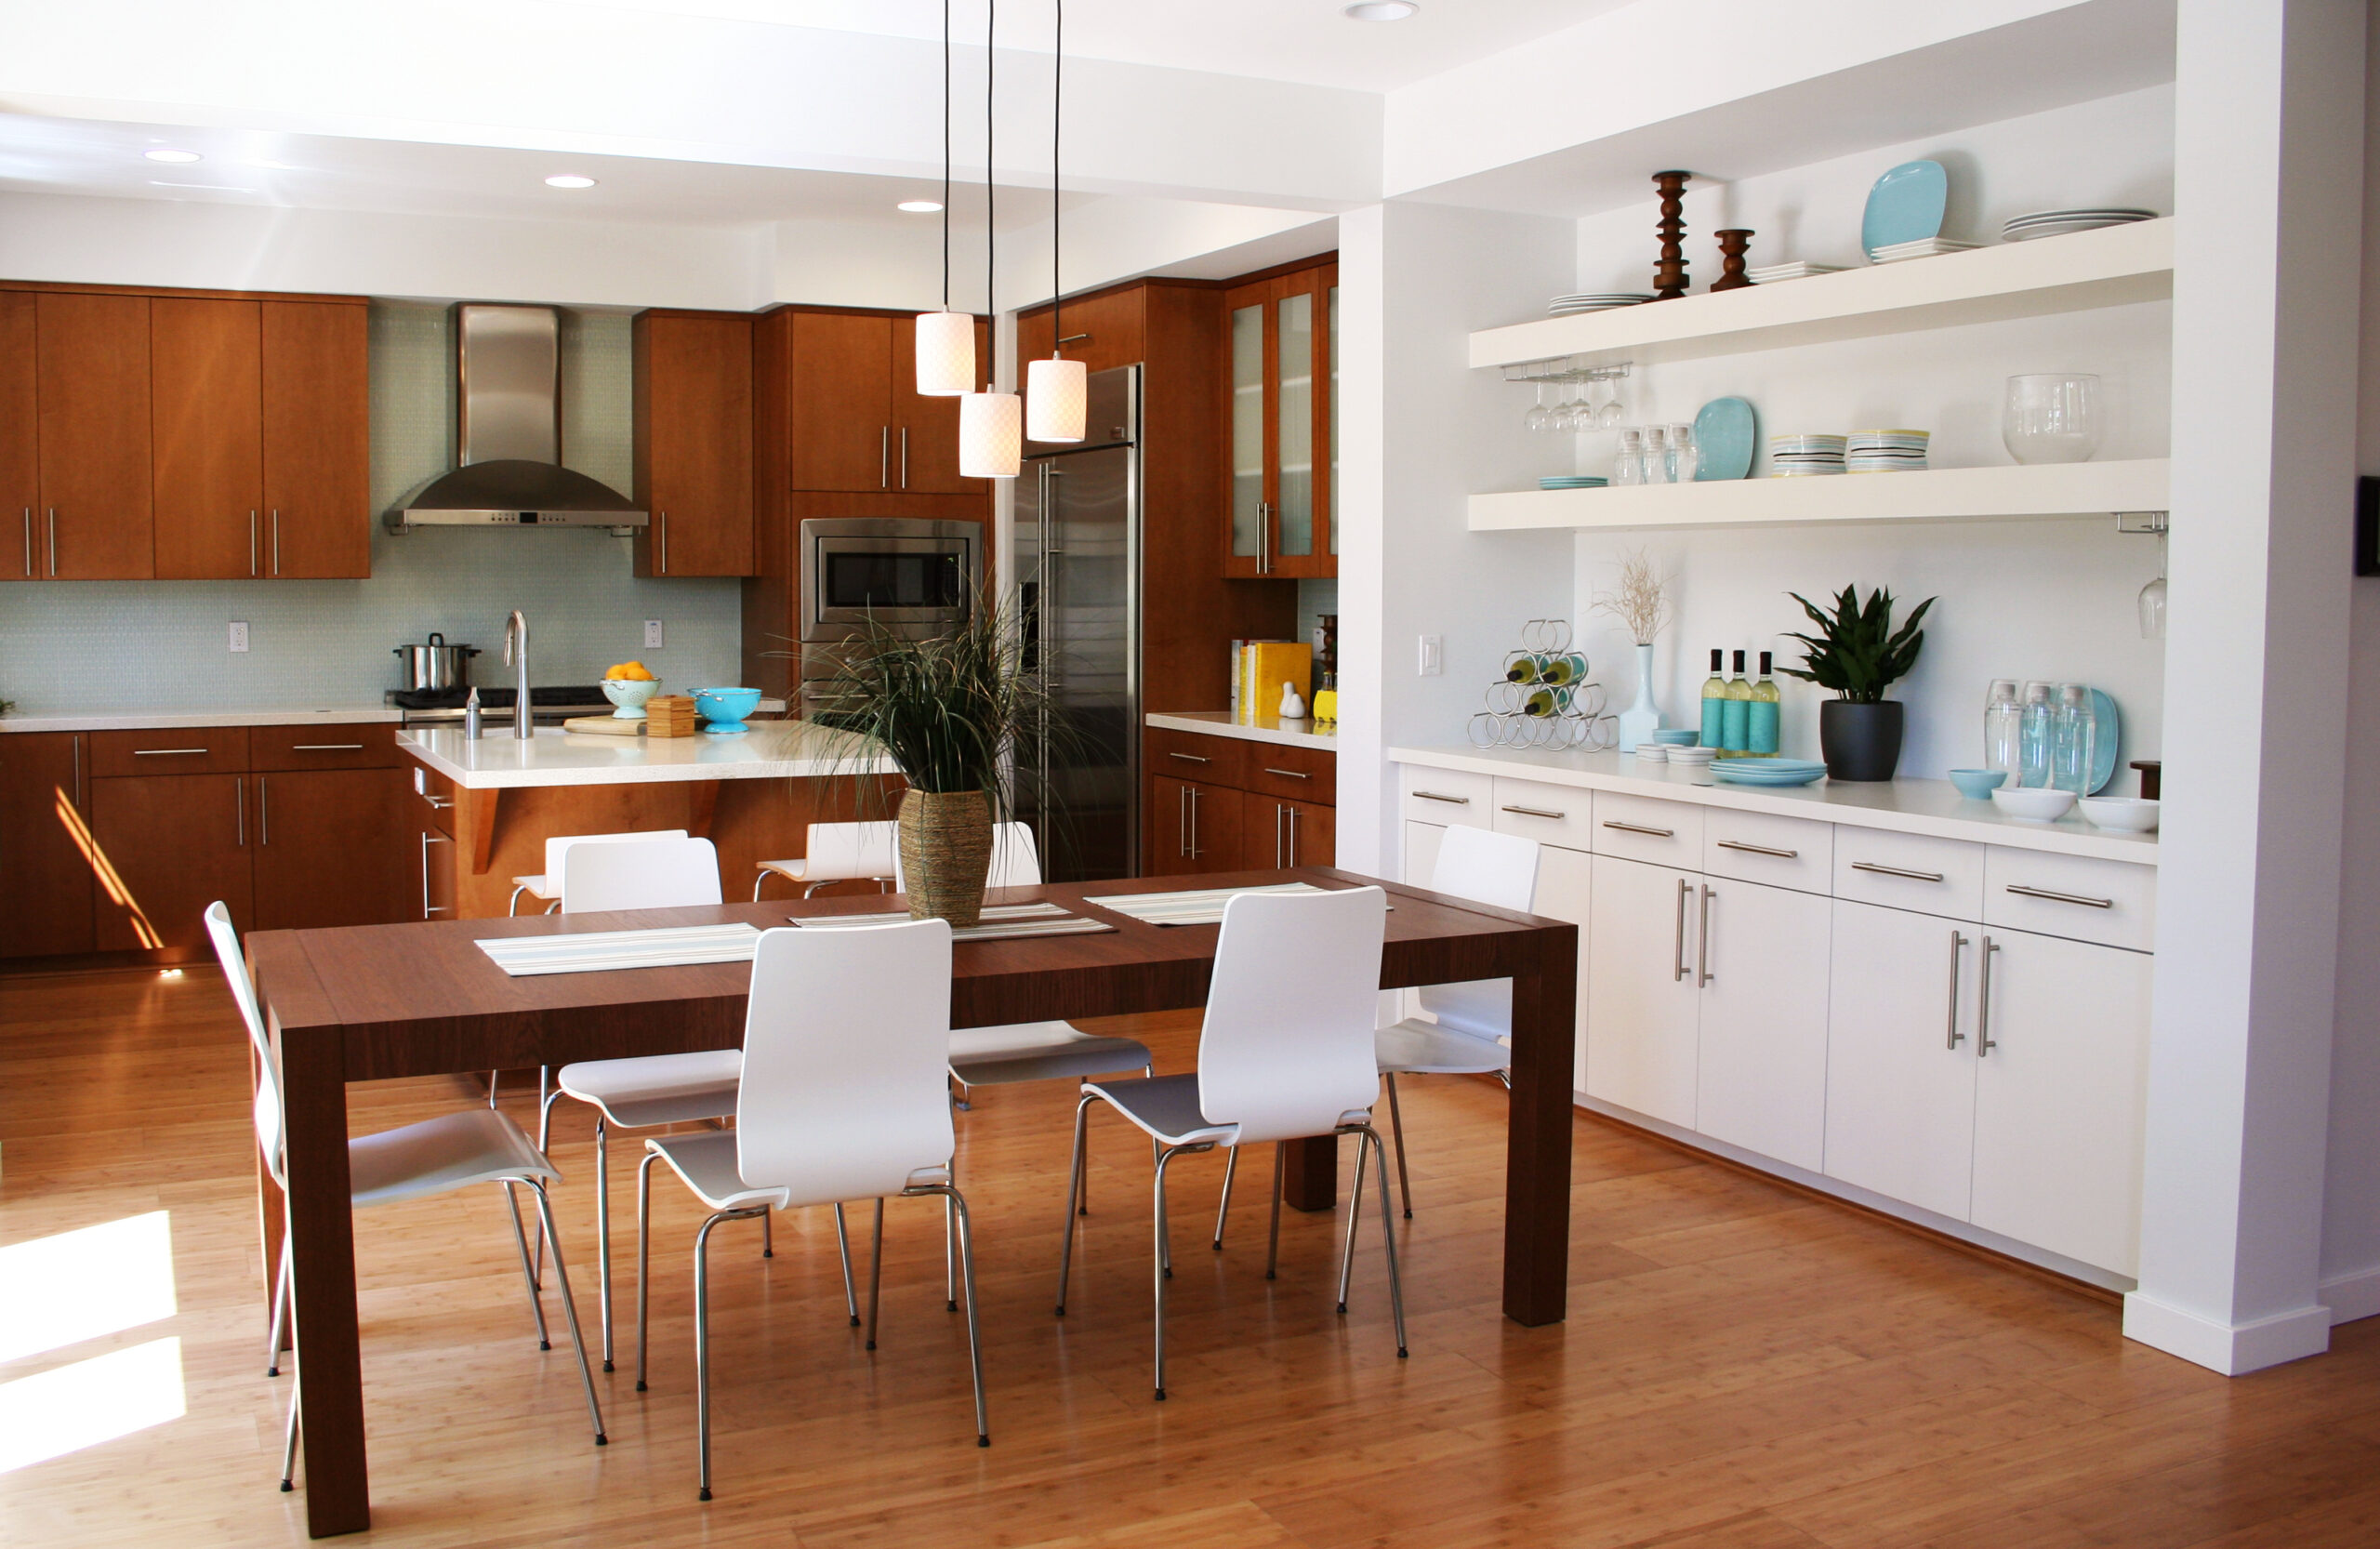 Beautiful sunny kitchen and dining room